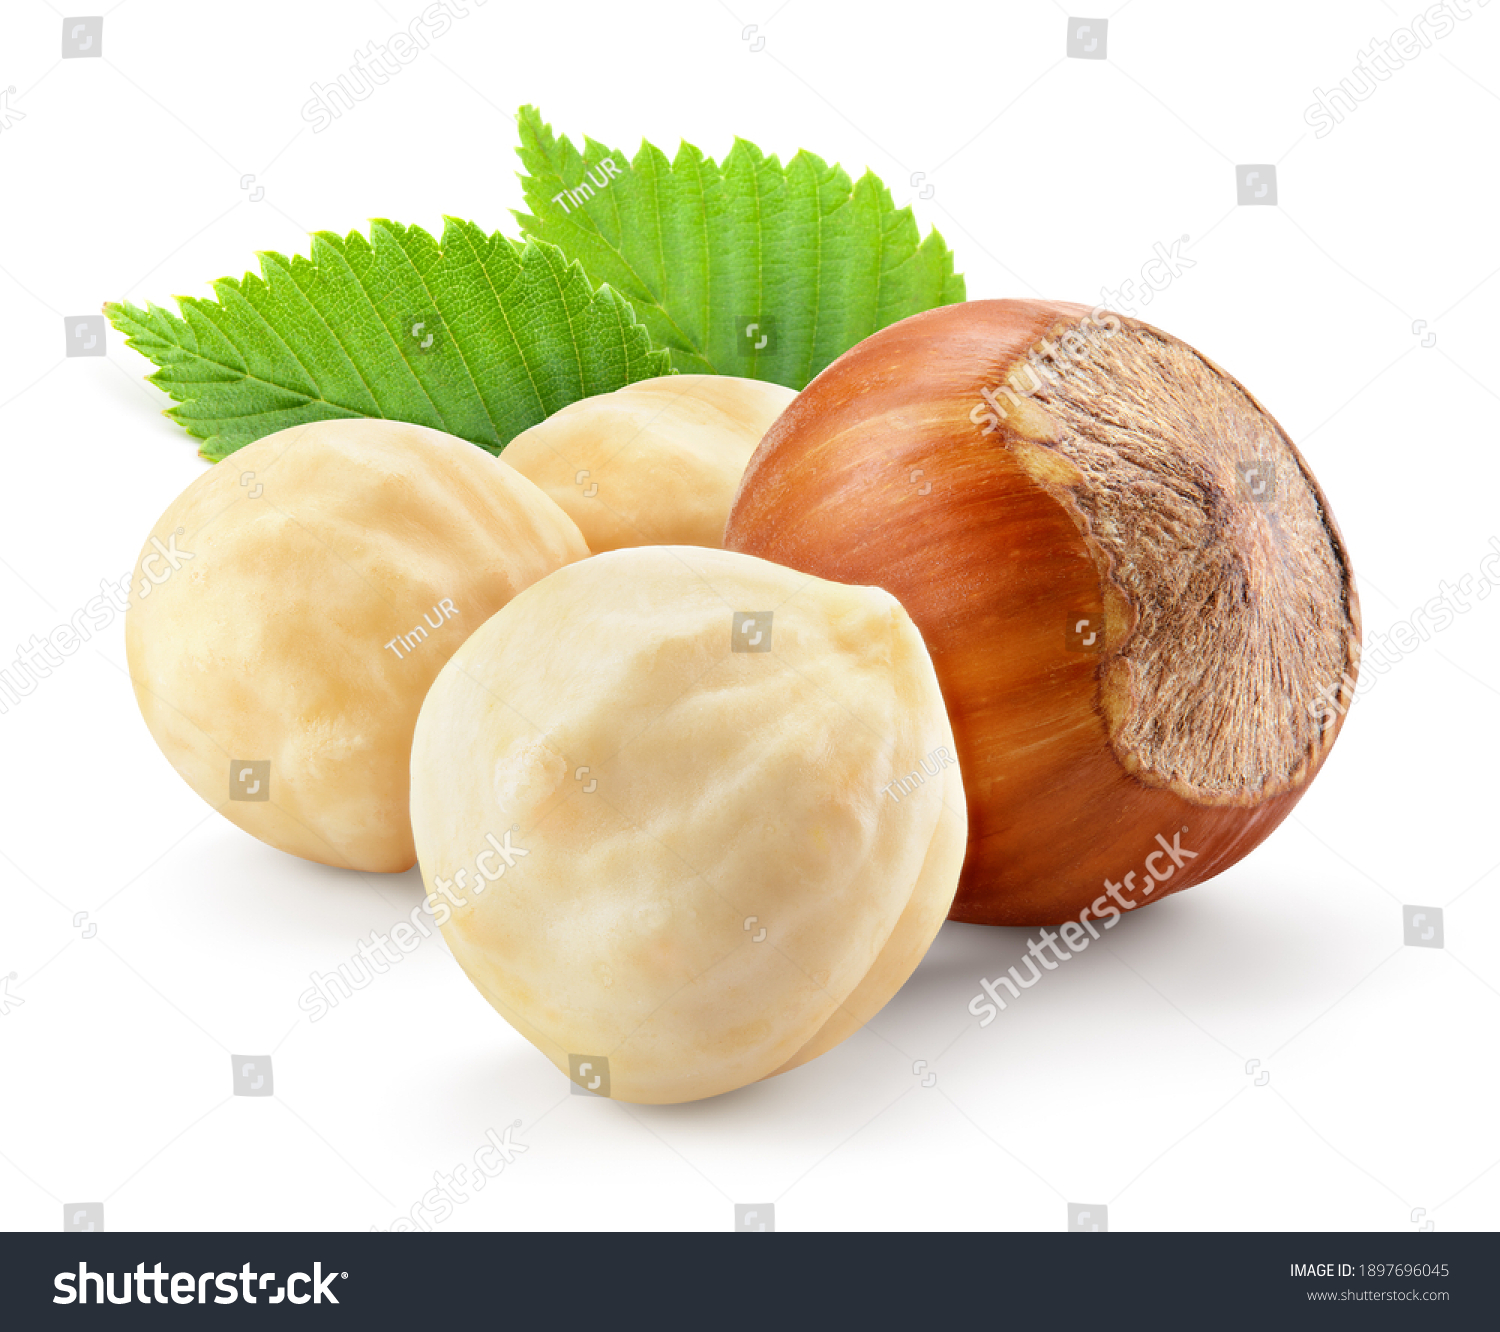 Hazelnut with leaf isolate. Hazelnut peeled and unpeeled with leaves on white. Forest nut. Filbert side view. Full depth of field. #1897696045